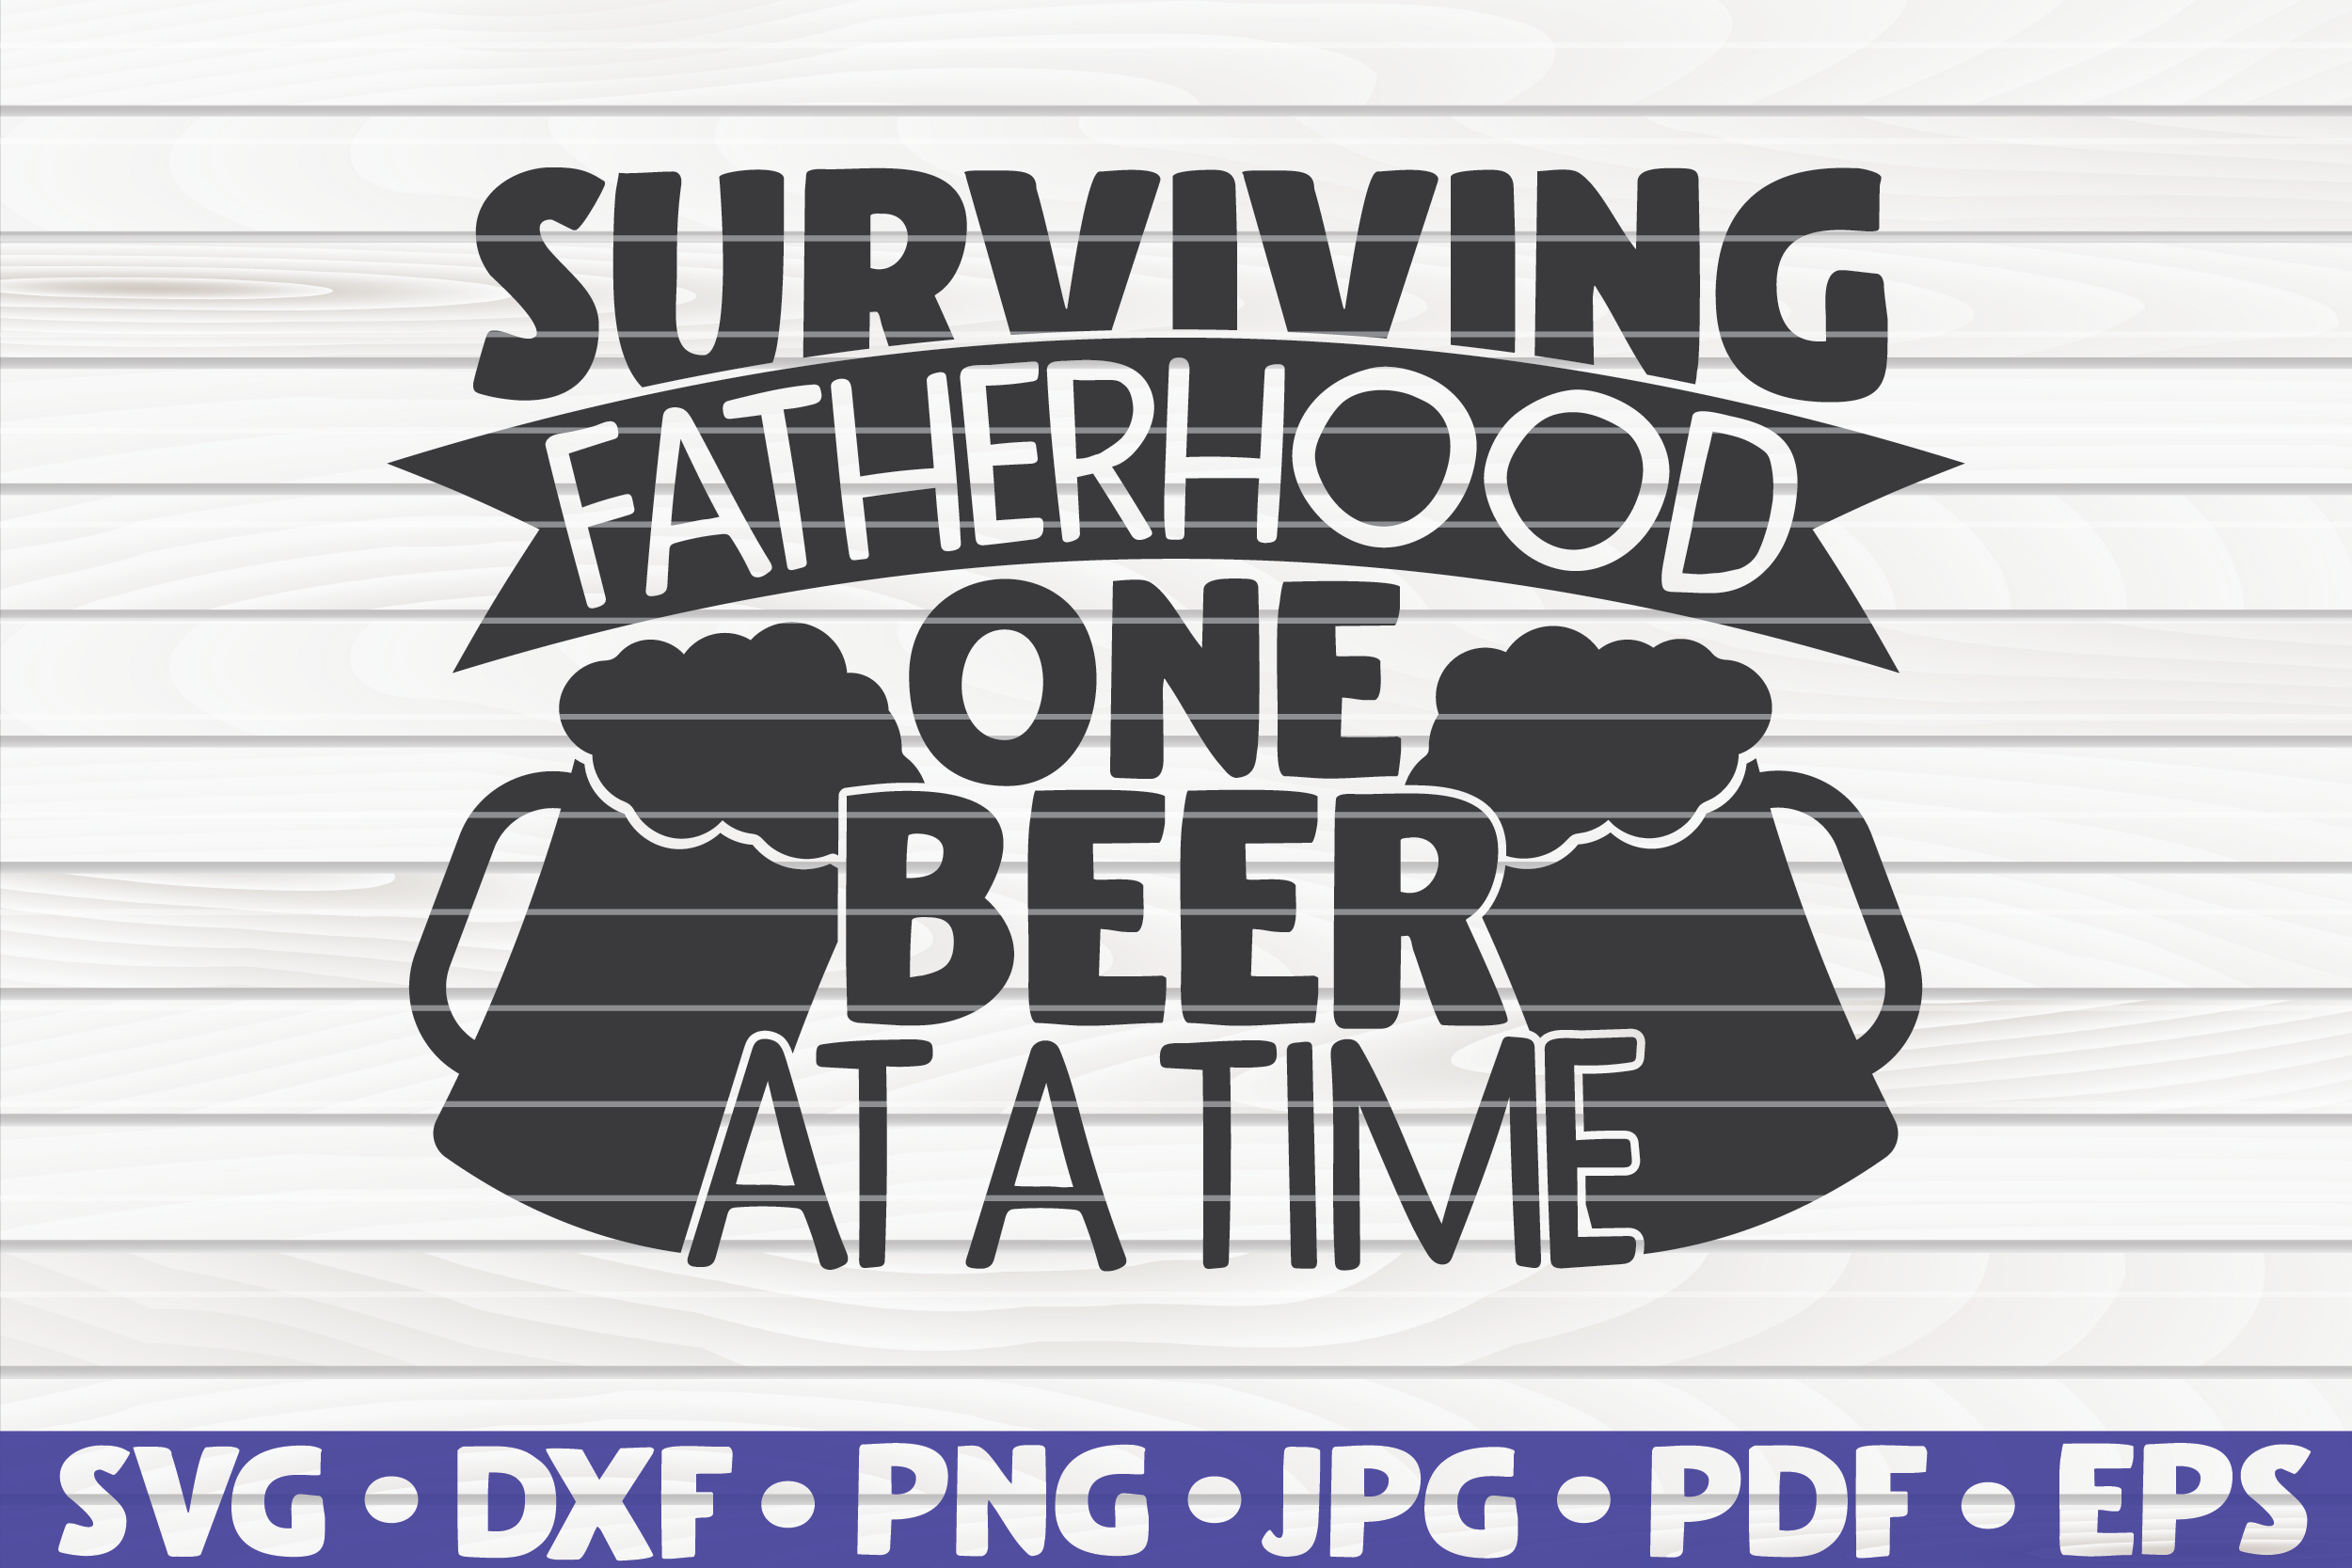 Download Surviving Fatherhood One Beer At A Time Svg Father S Day By Hqdigitalart Thehungryjpeg Com